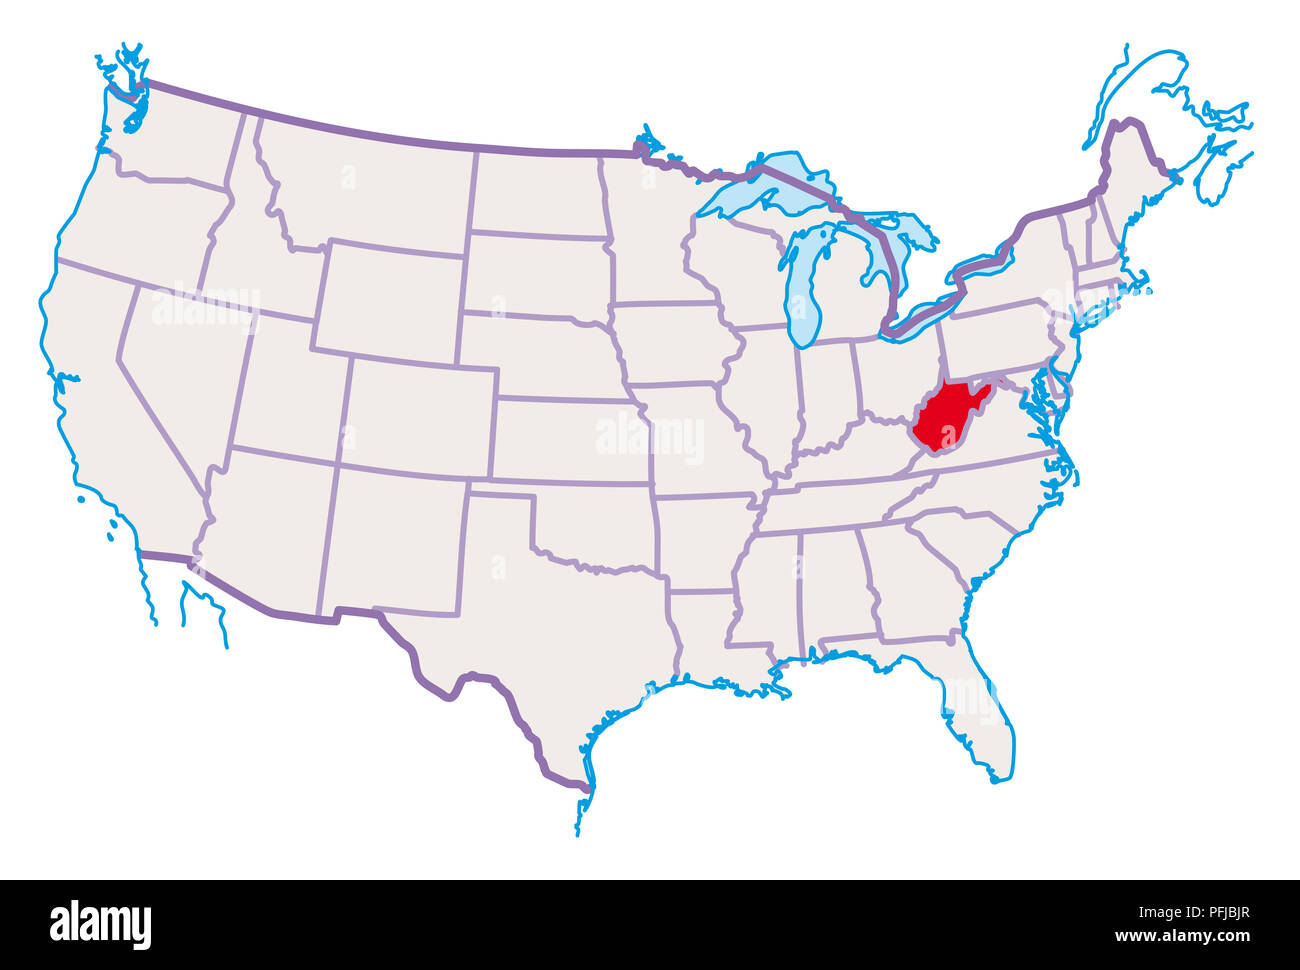 Map Of Usa West Virginia Highlighted In Red Stock Photo Alamy